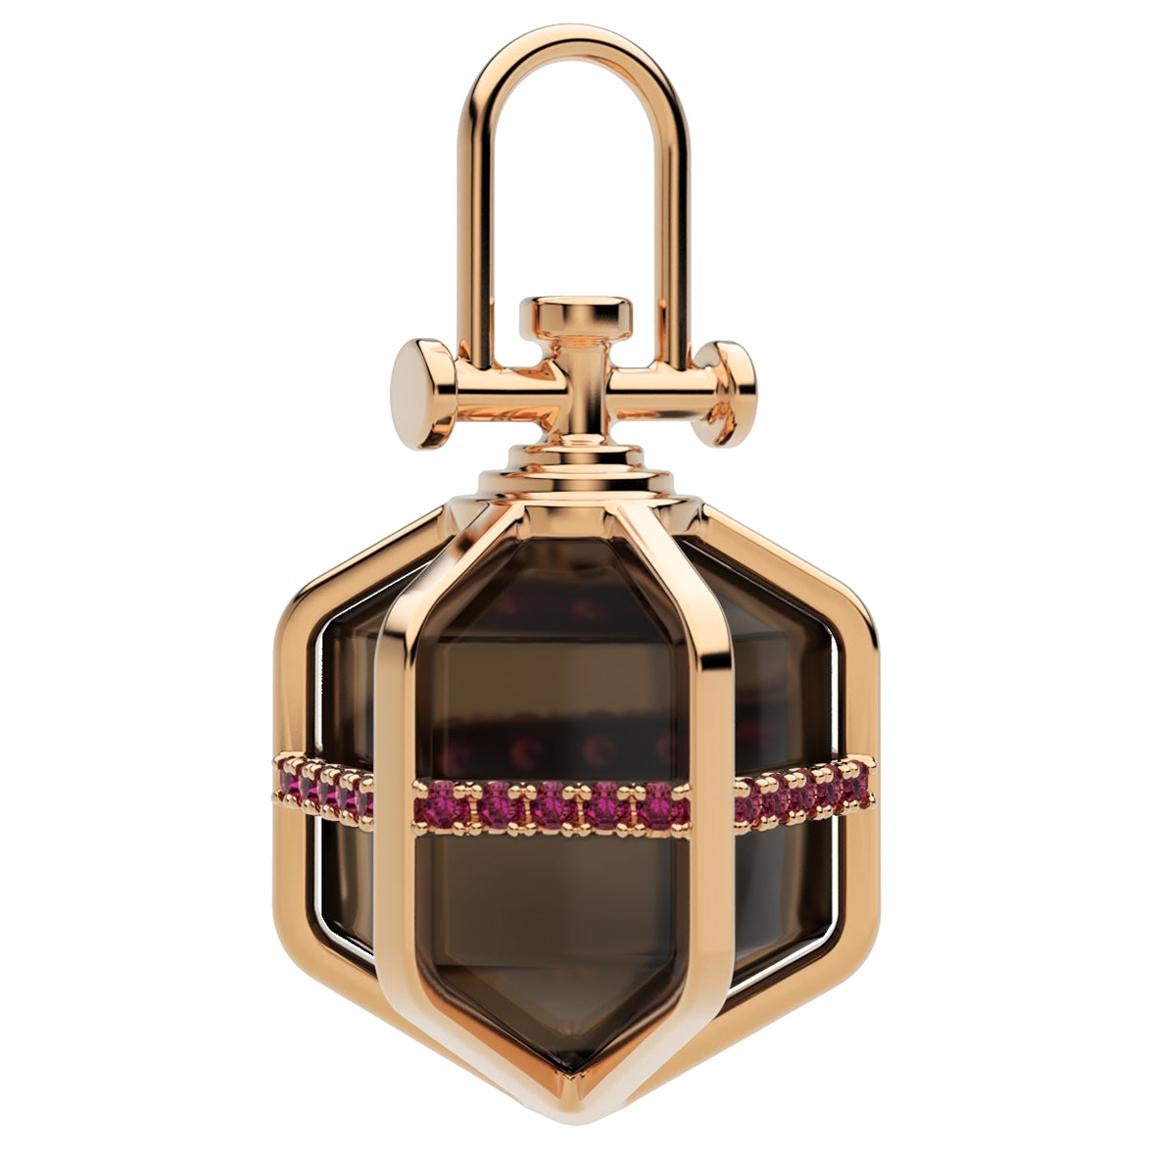 Modern Sacred 18k Rose Gold Amulet Pendant Necklace with Ruby and Smoky Quartz